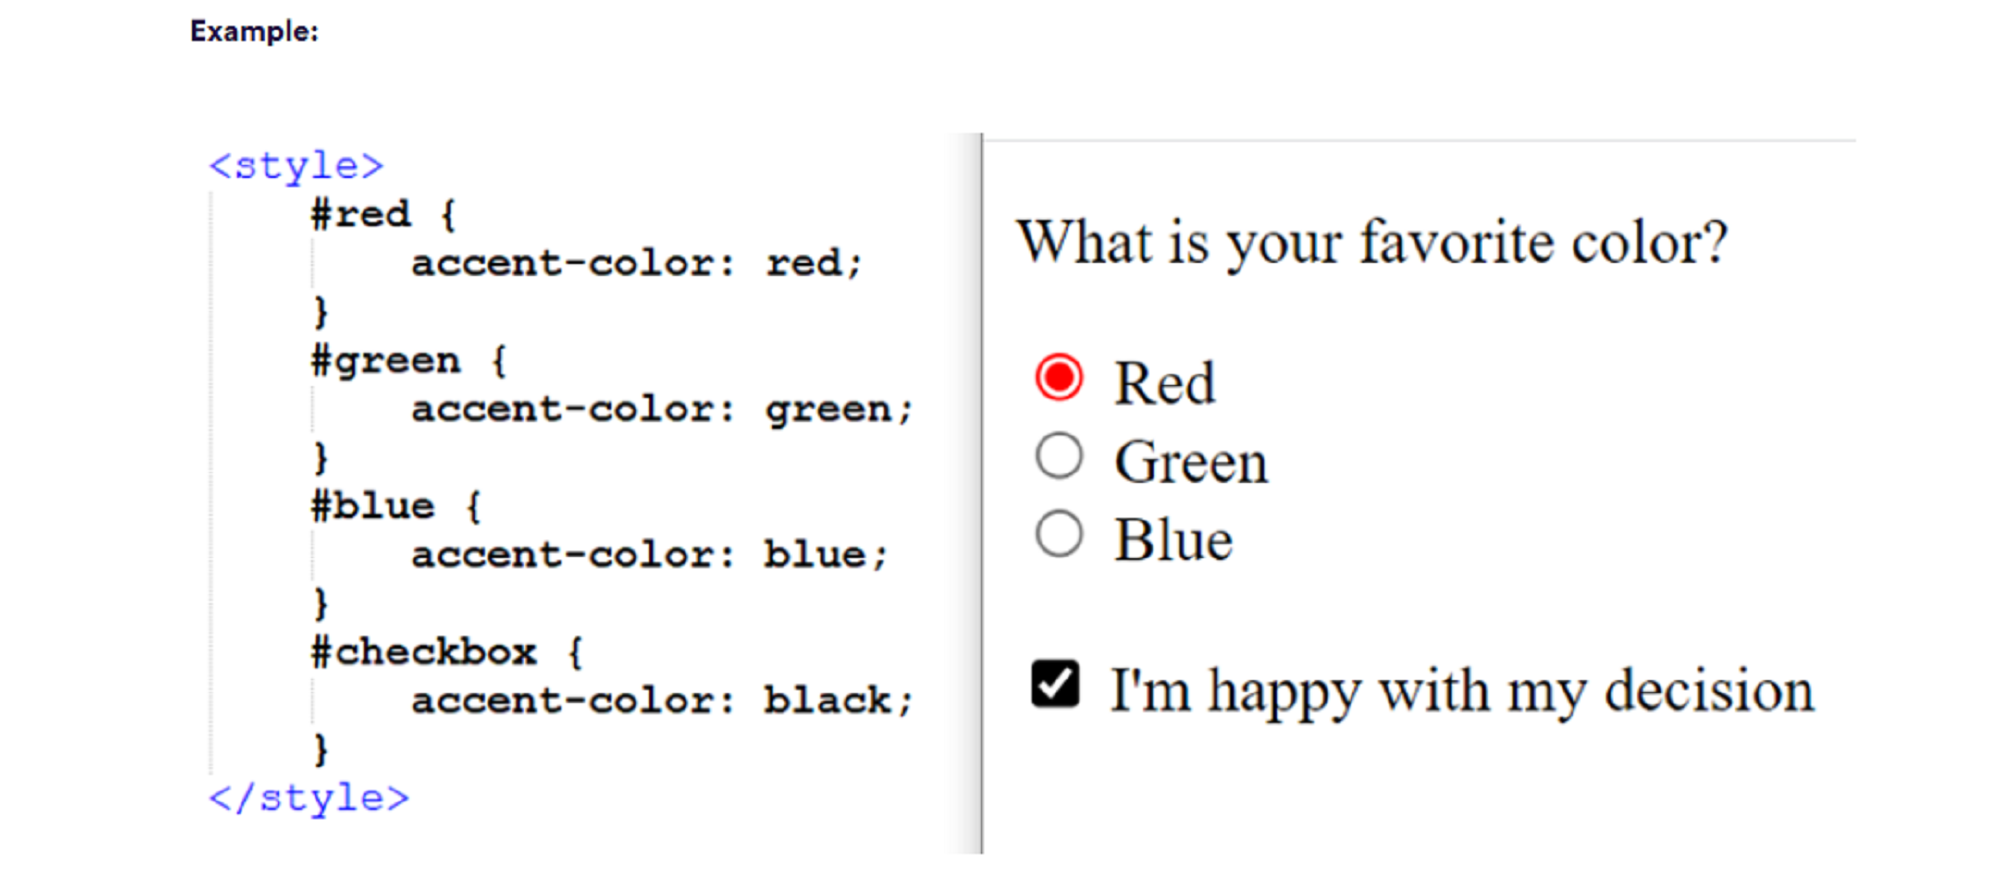 Accent-Color Property in CSS